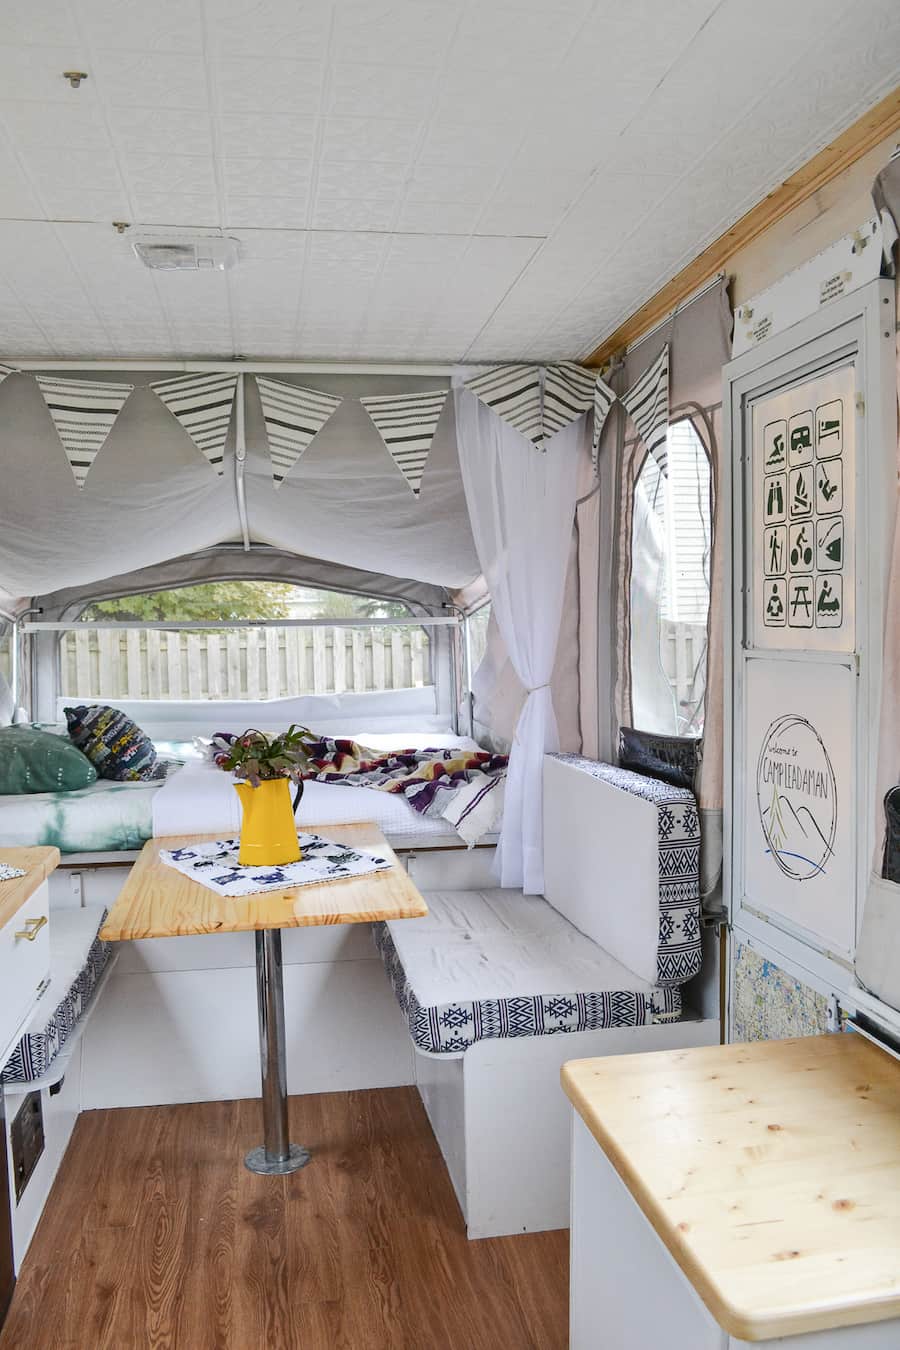 https://refreshcamping.com/wp-content/uploads/2017/11/remodeled-pop-up-camper-rv-with-vintage-boho-electic-design-new-ceiling-counters-painted-cabinets-table-and-backsplash-8-of-10.jpg